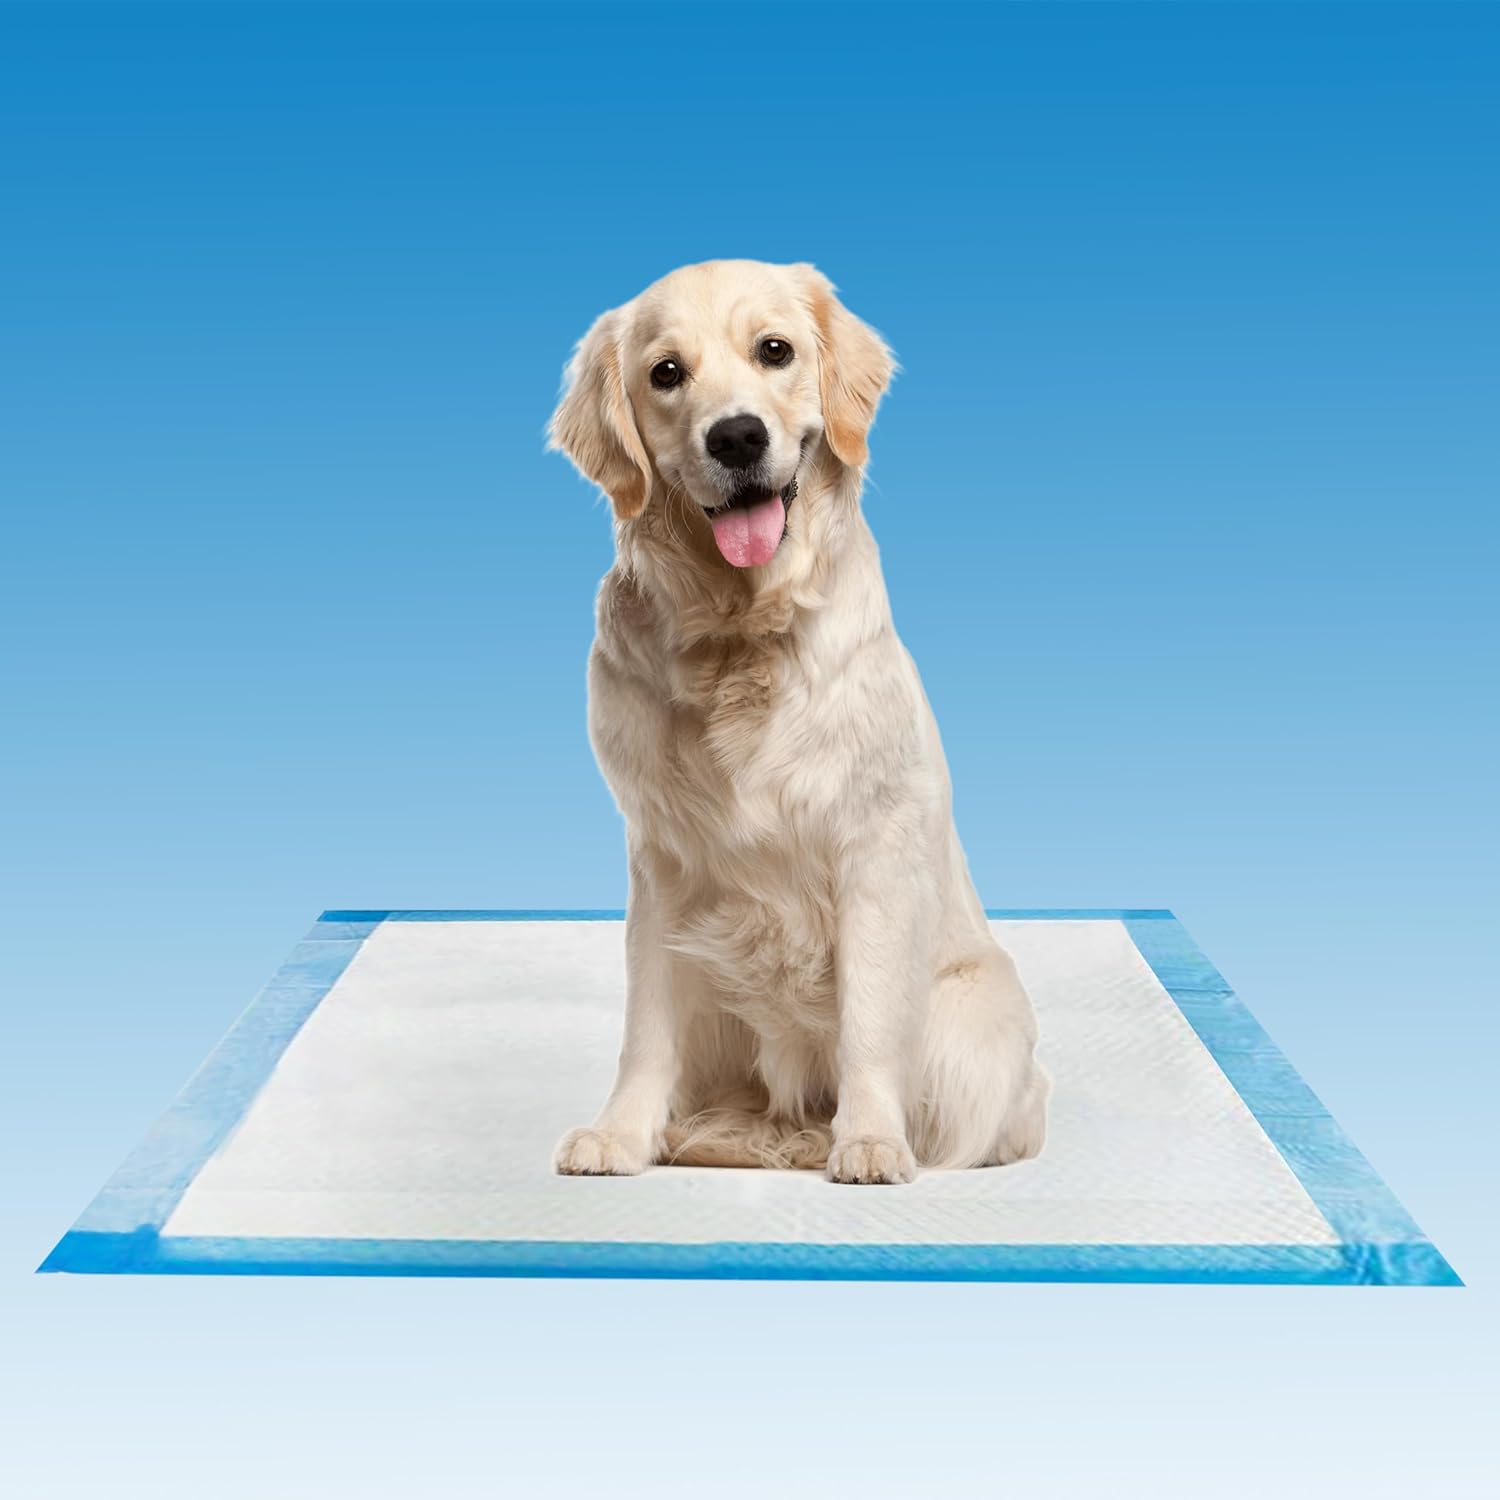 Henry Schein Disposable Underpads 23'' x 24'' Incontinence Pads, Bed Covers, Puppy Training | Thick, Super Absorbent Protection for Kids, Adults, Elderly | Liquid, Urine, Accidents